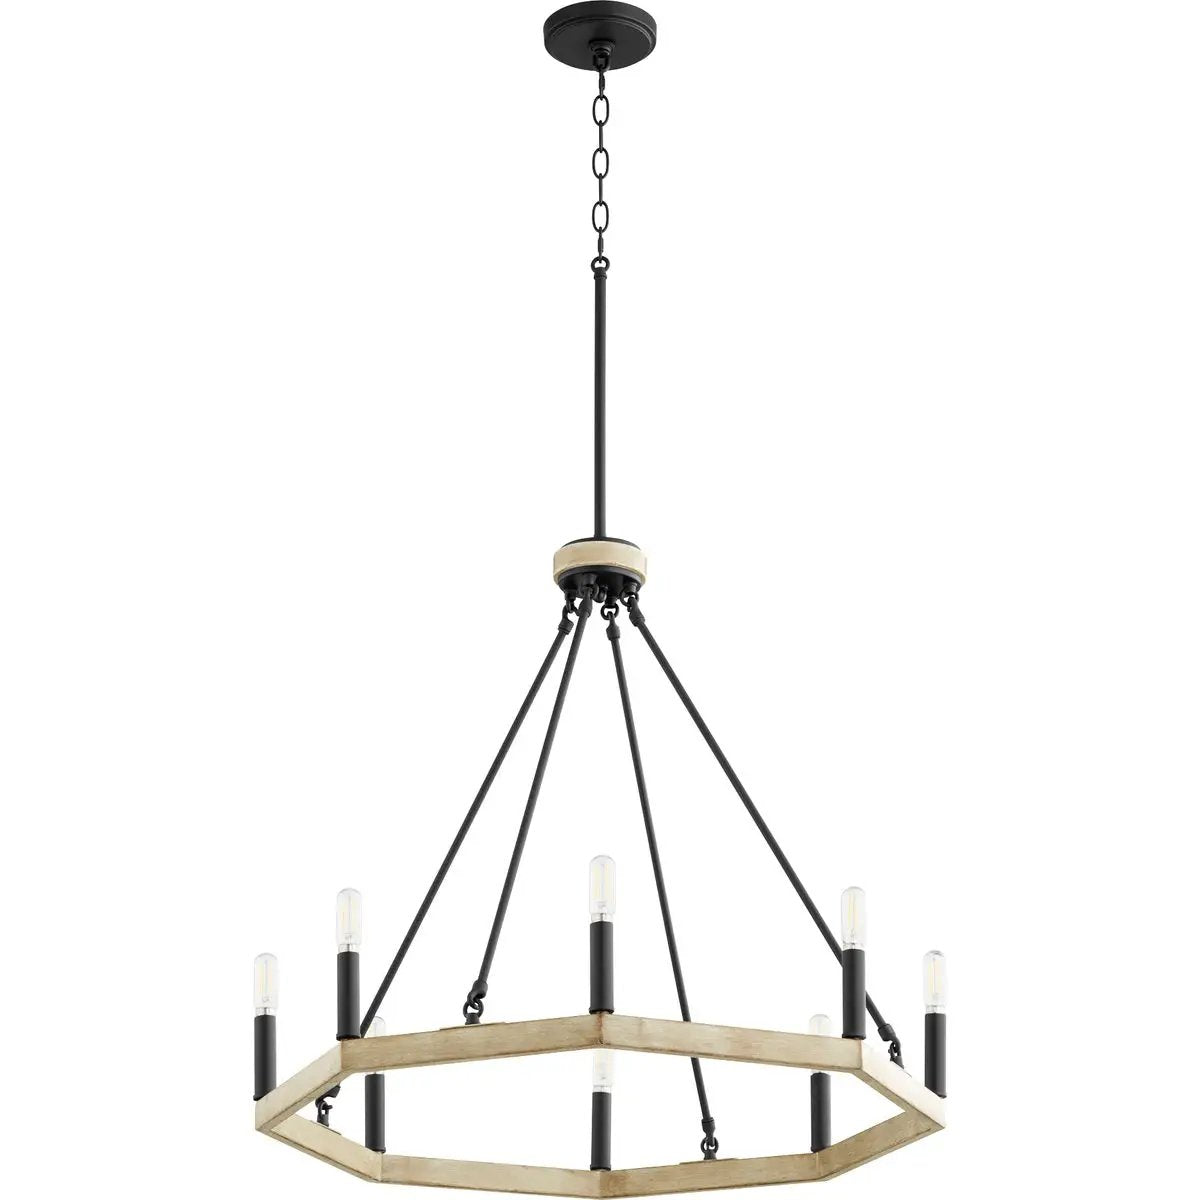 Modern Farmhouse Chandelier with wood frame, black and white shade, and close-up of light fixture. Perfect for rustic style applications.